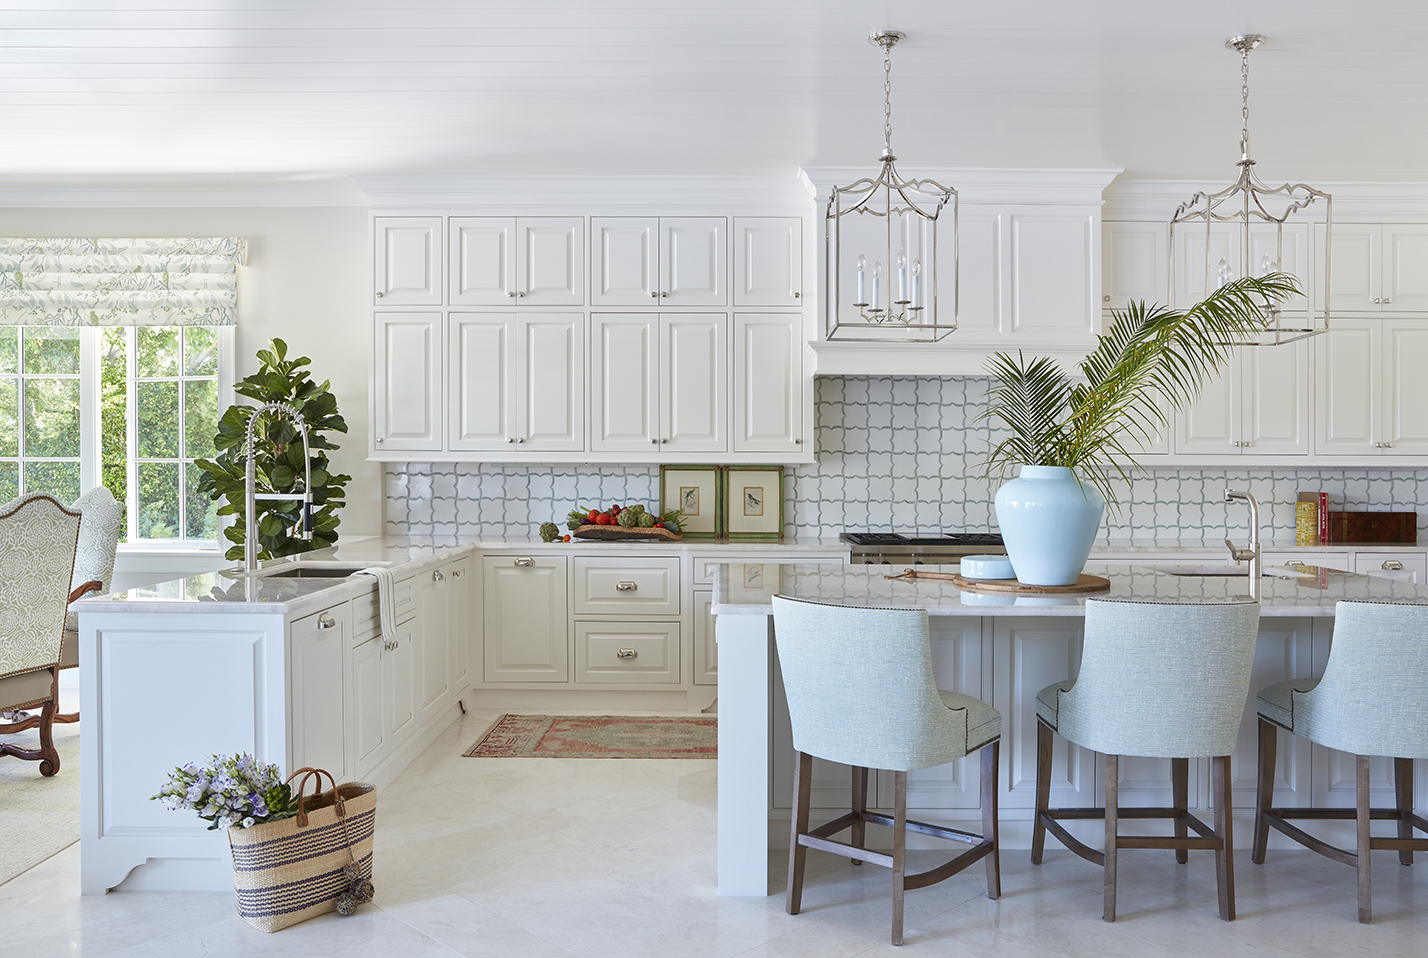 The kitchen’s quartzite-topped island is paired with stools covered in performance fabric.